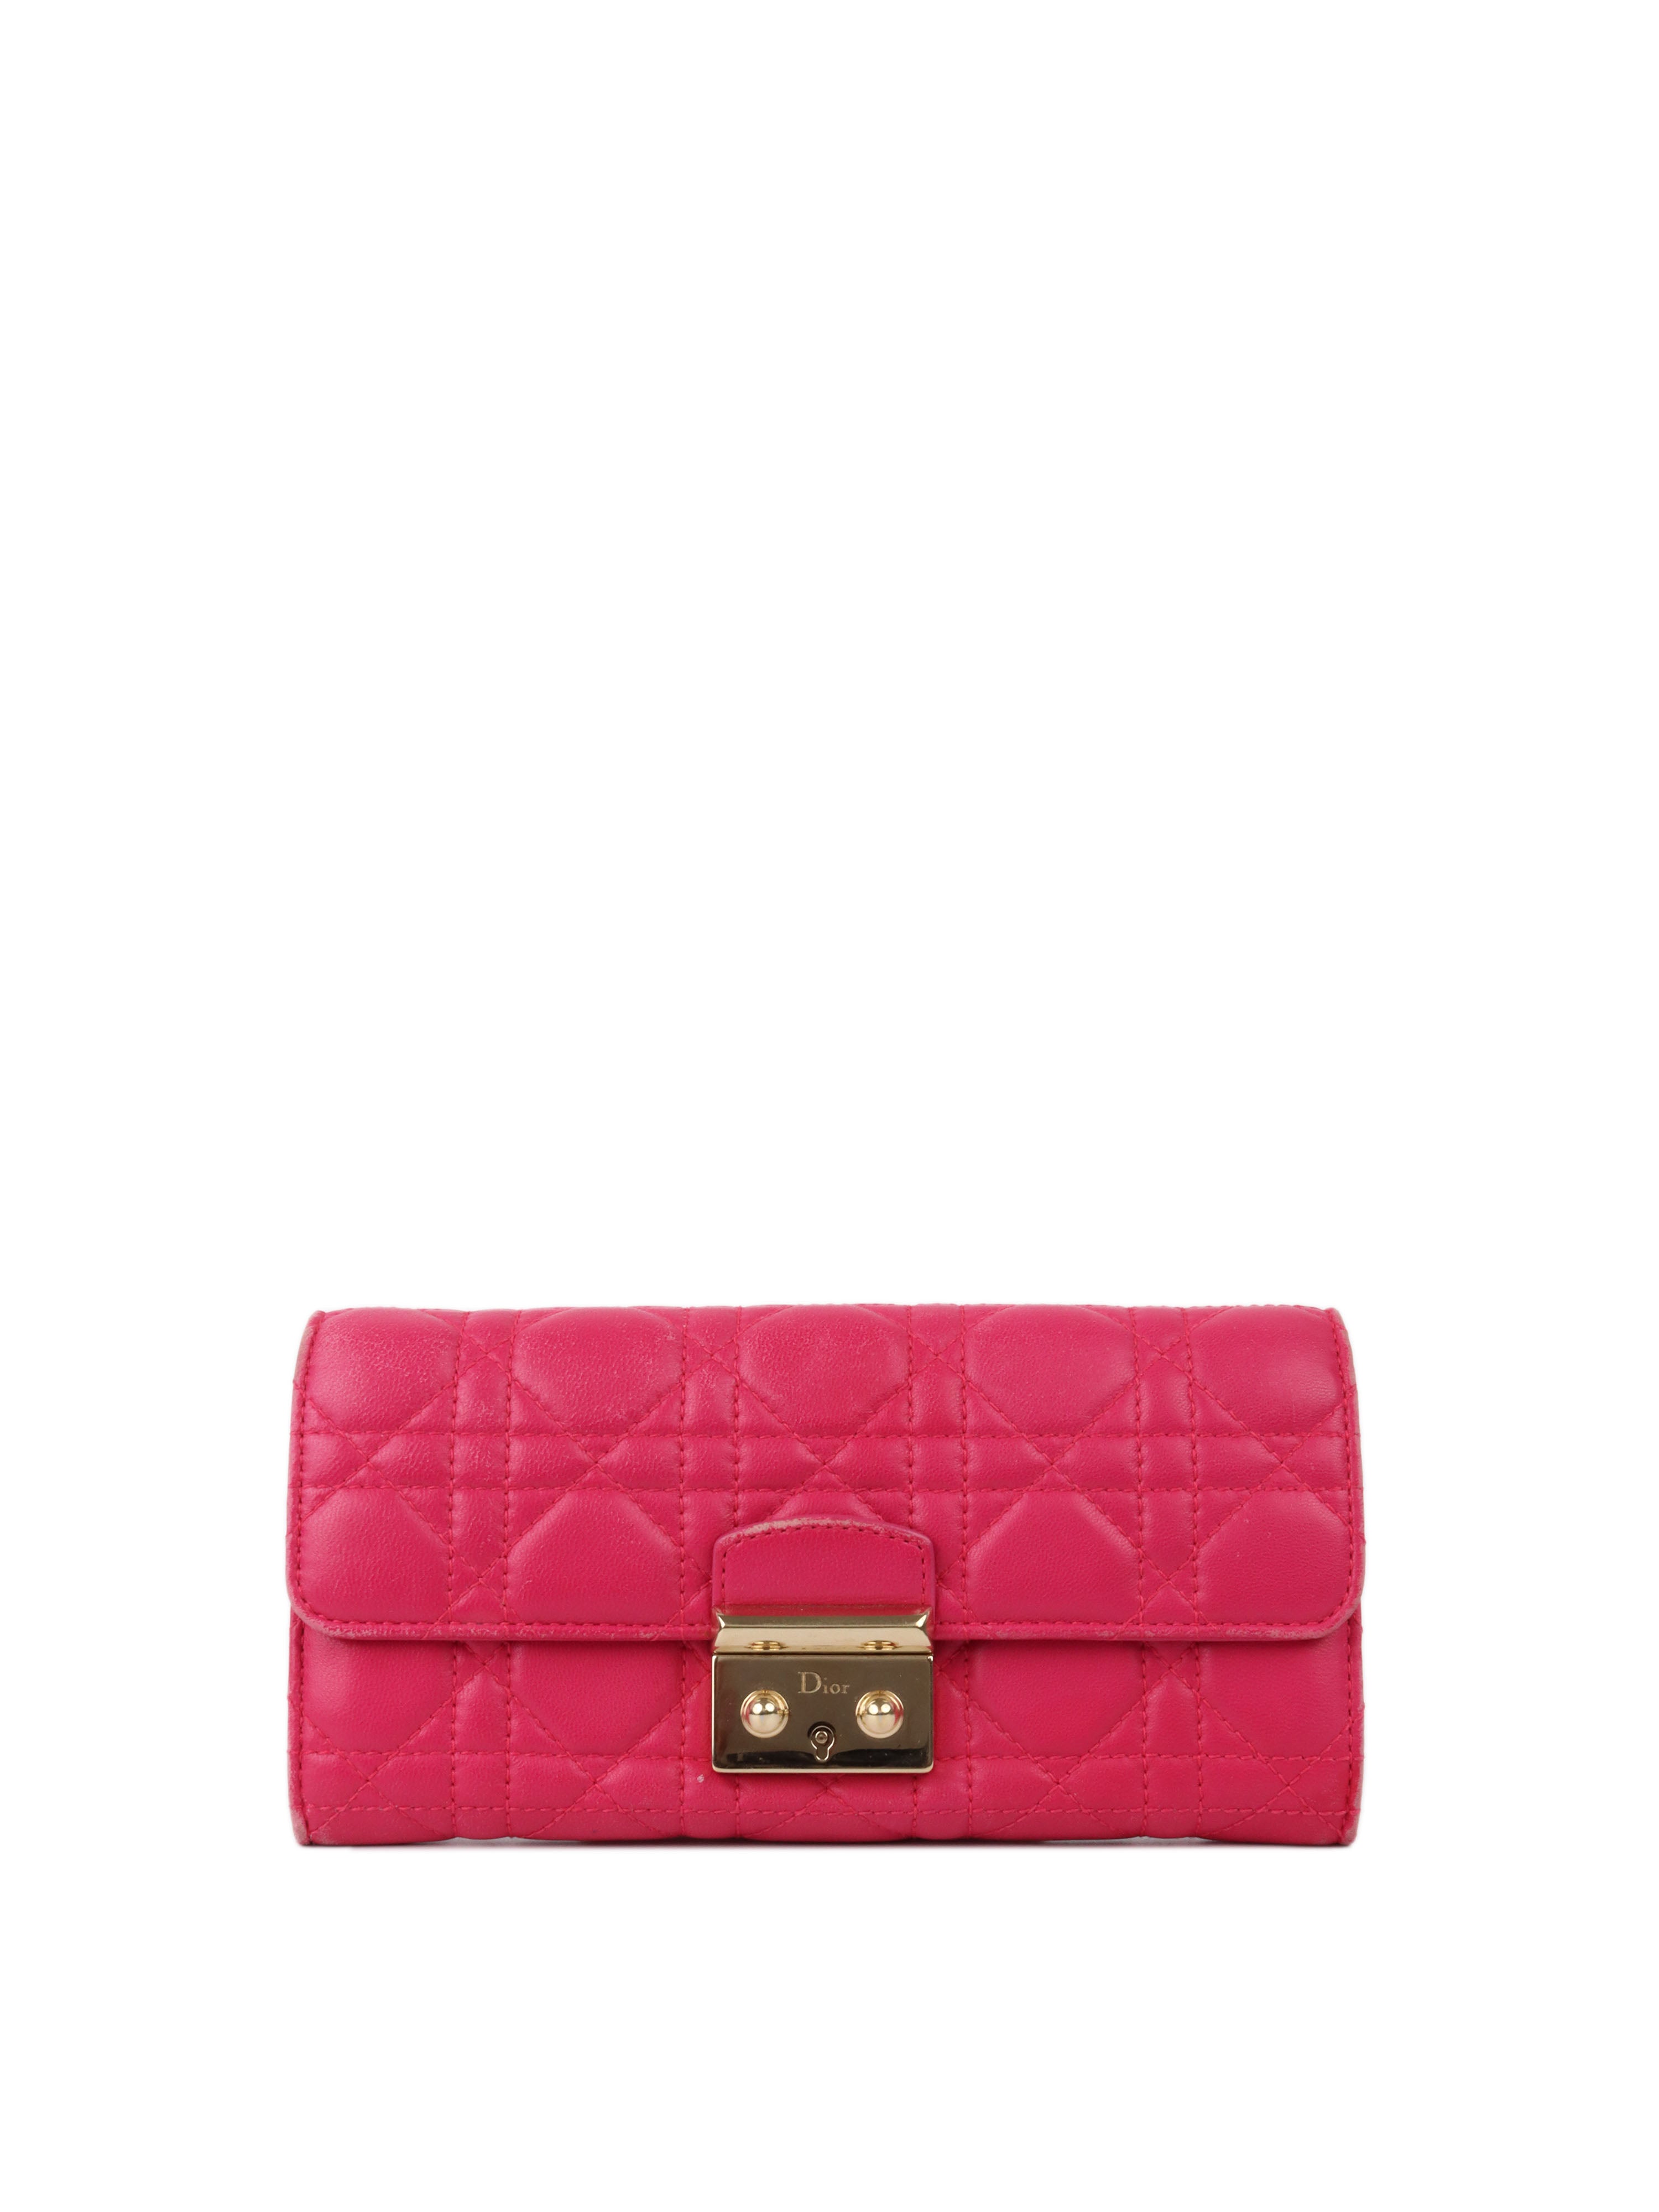 Pink Quilted Dior Long Wallet.